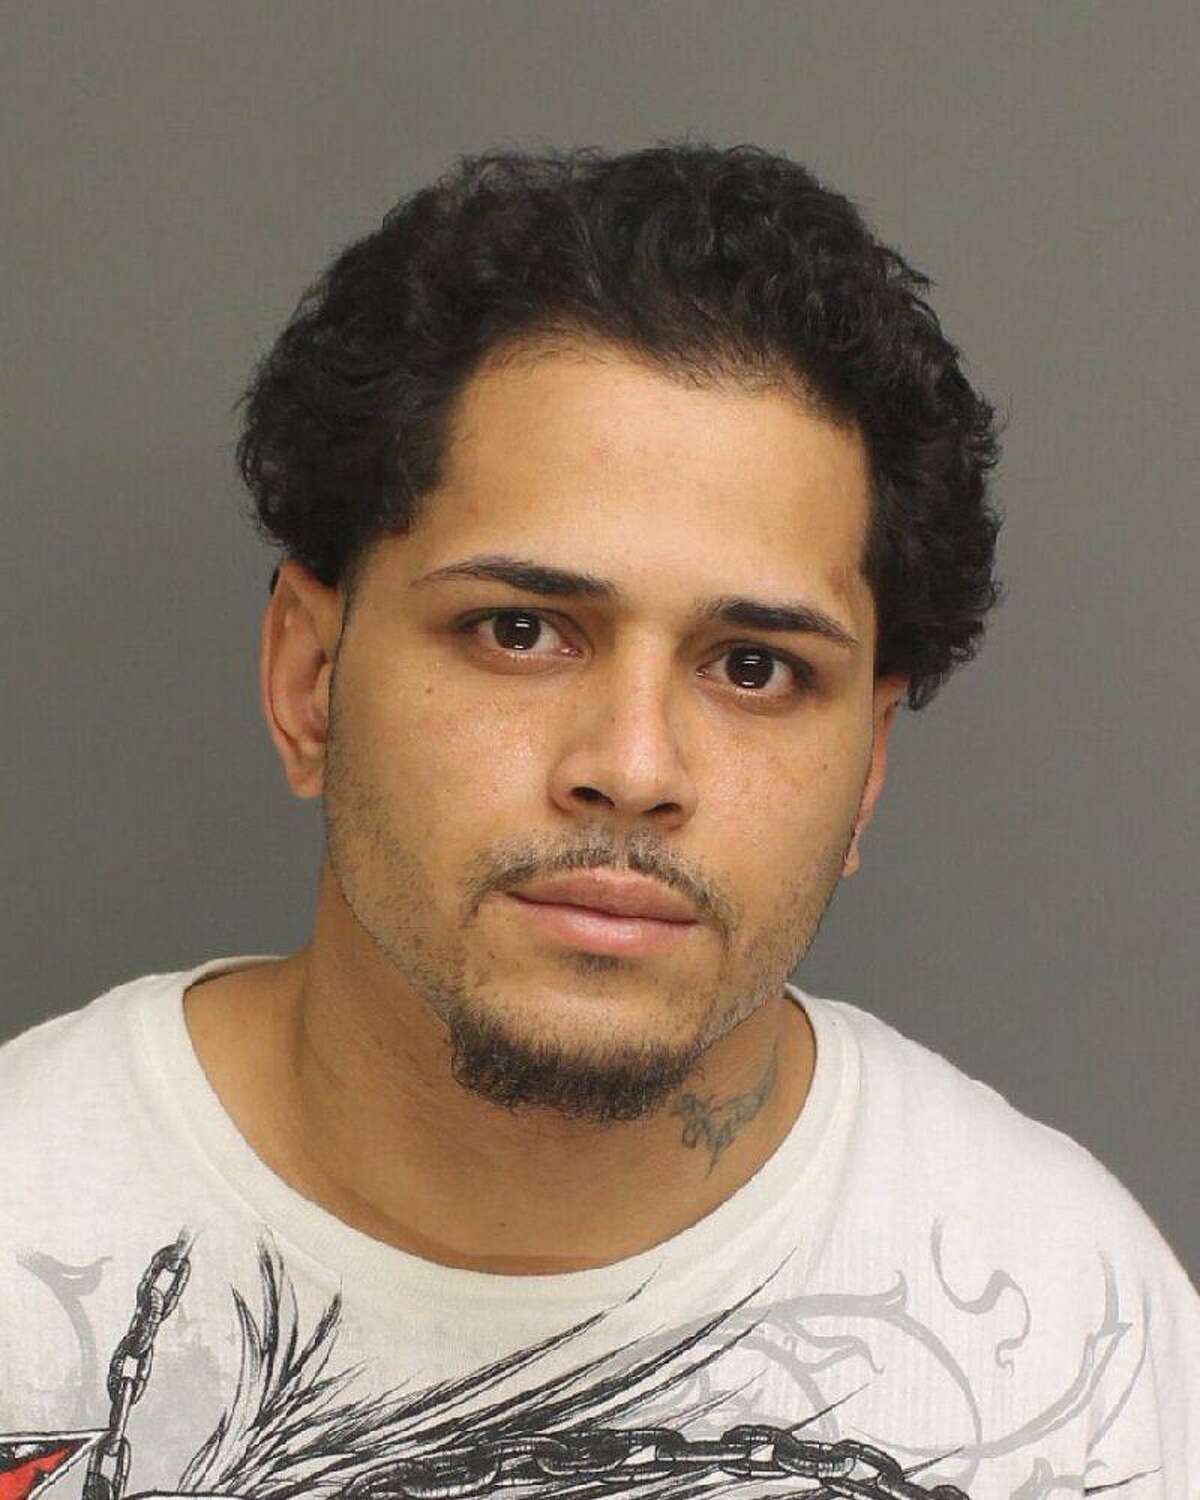 Moises Contreras, 29, was arrested on Jan. 24, 2017 in connection with the fatal shooting on Christmas Eve of Miguel Rivera.